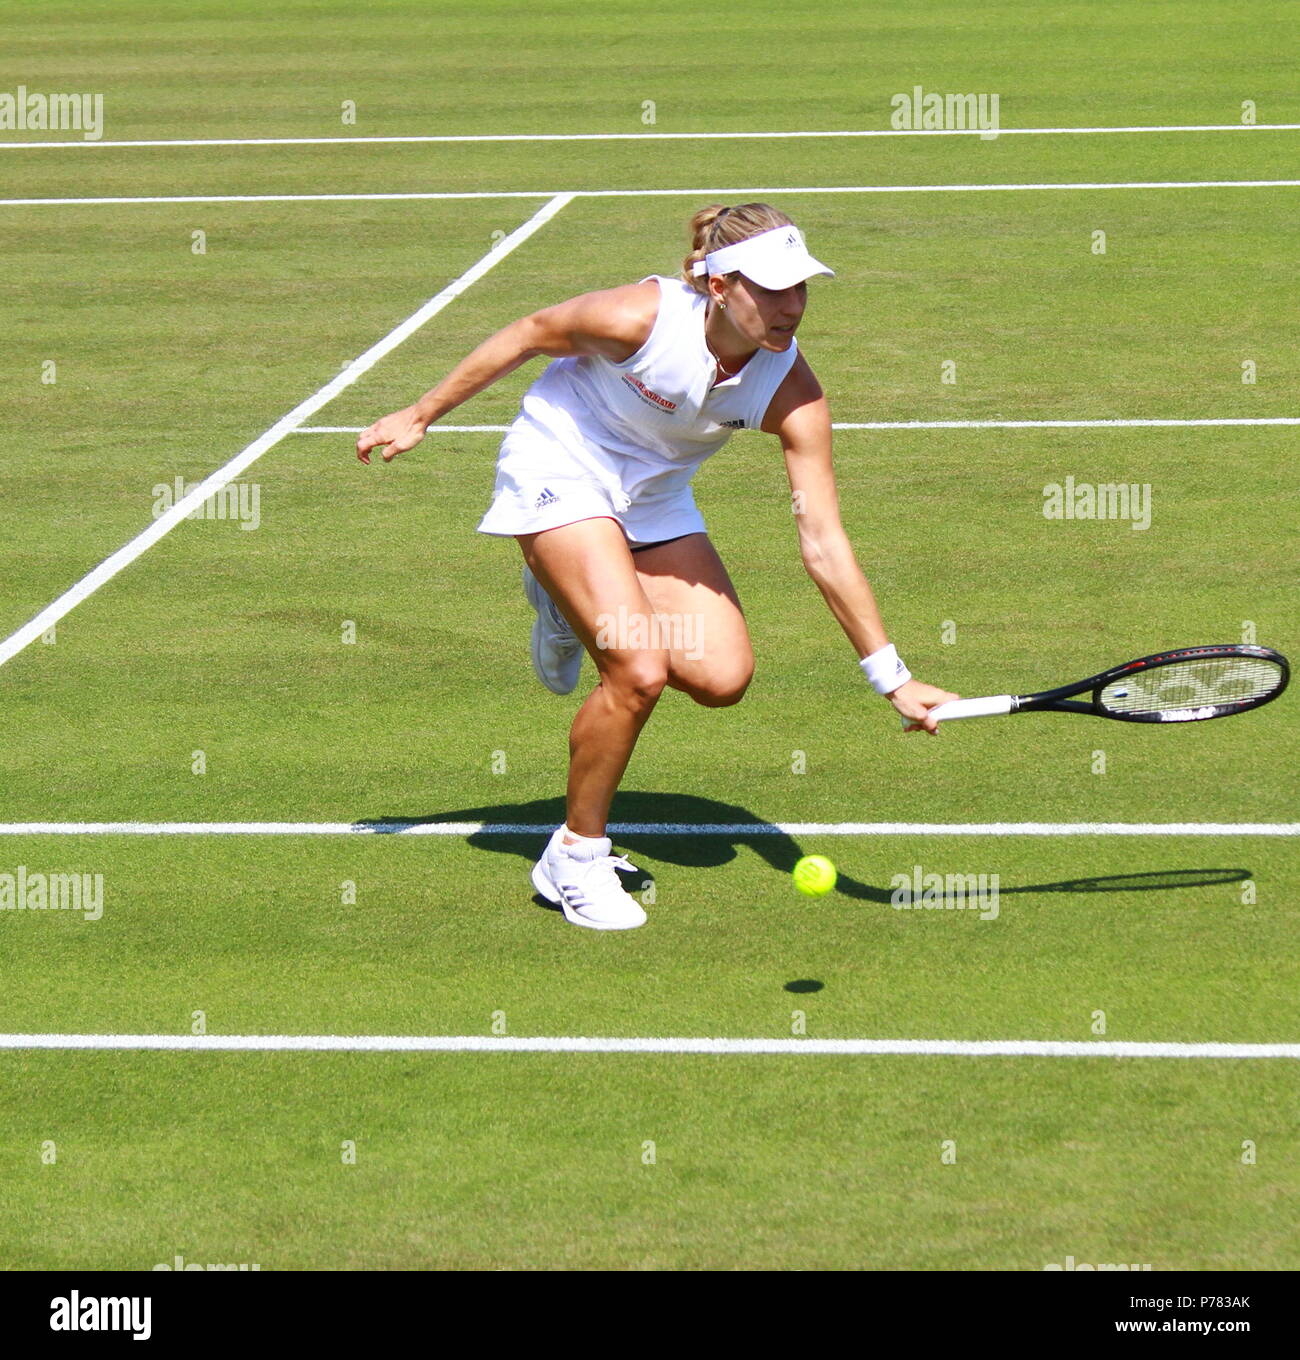 Angelique Kerber playing in her 1st round match at the 2018 Wimbledon Tennis Championships in which she won against Vera Zvonareva. Wimbledon . Wimbledon champion 2018. Stock Photo